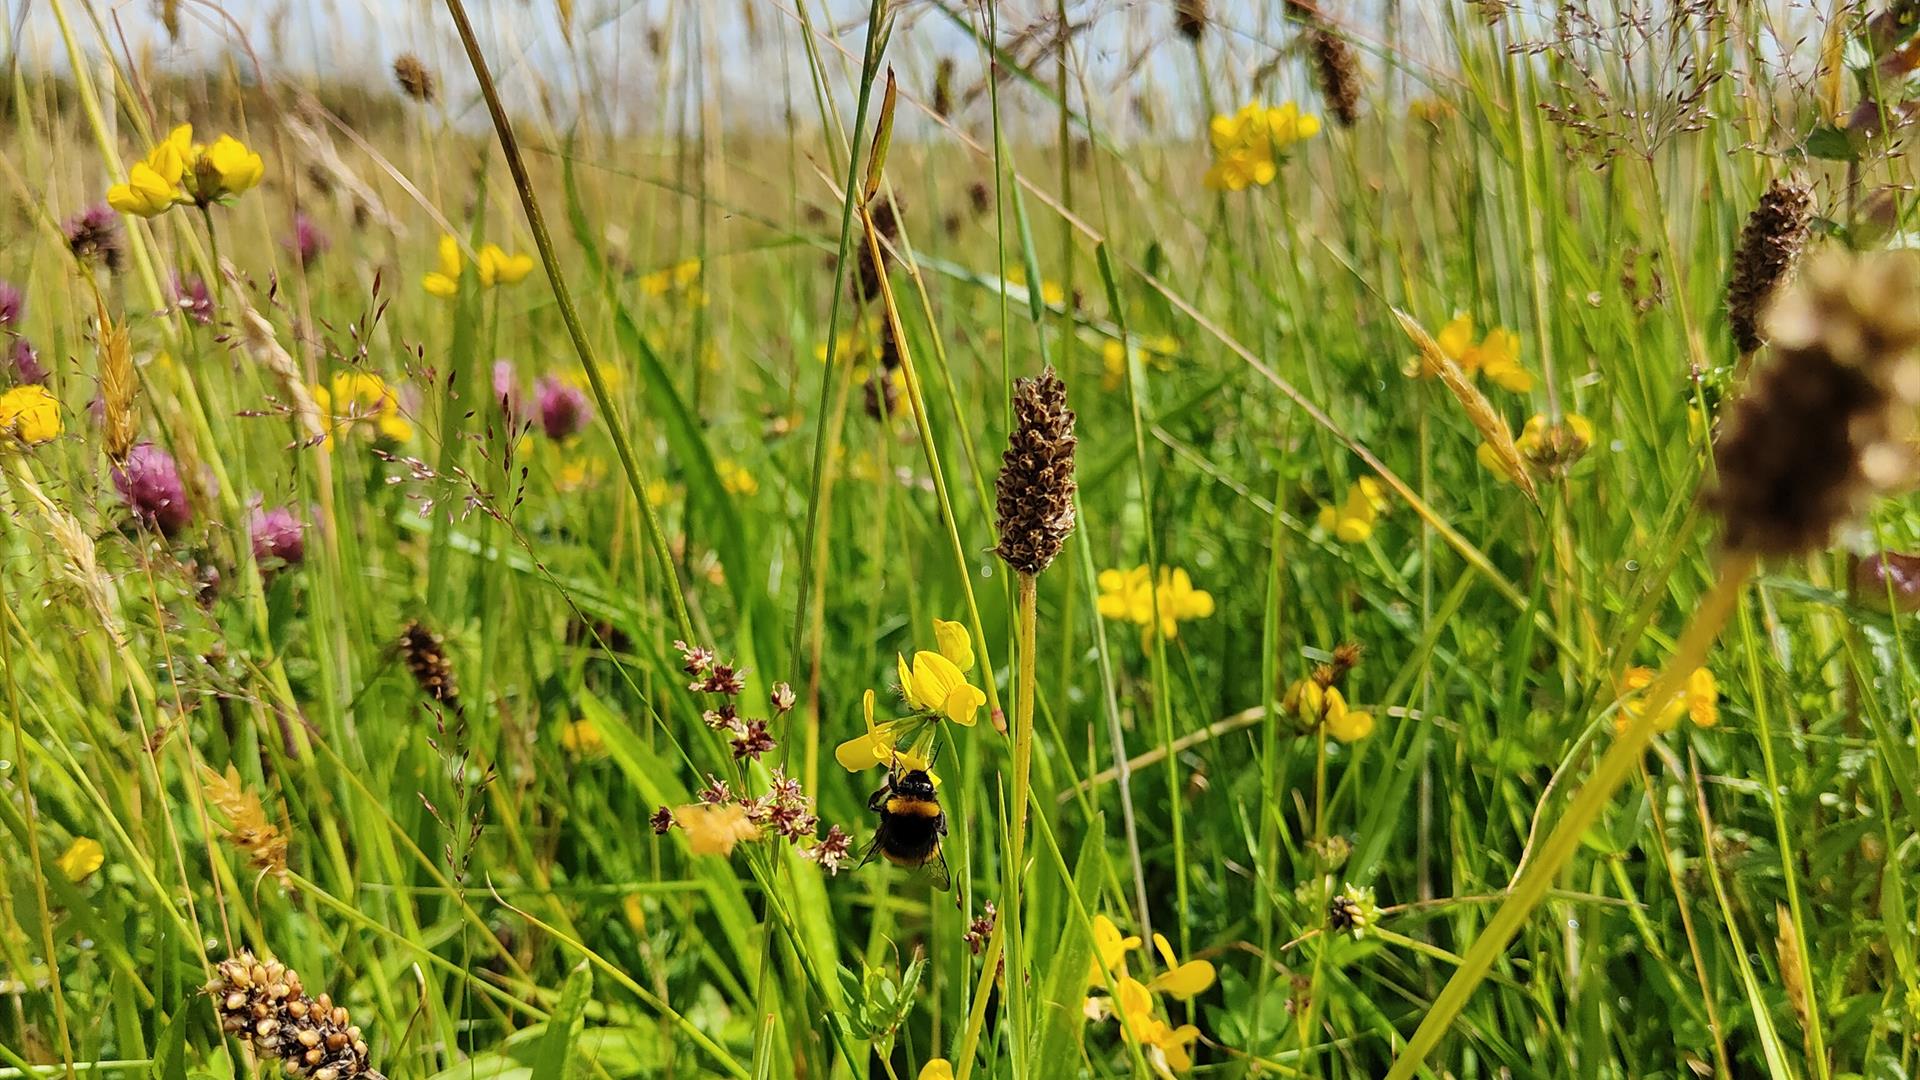 close up of a grassy field featuring wild flowers and rushes